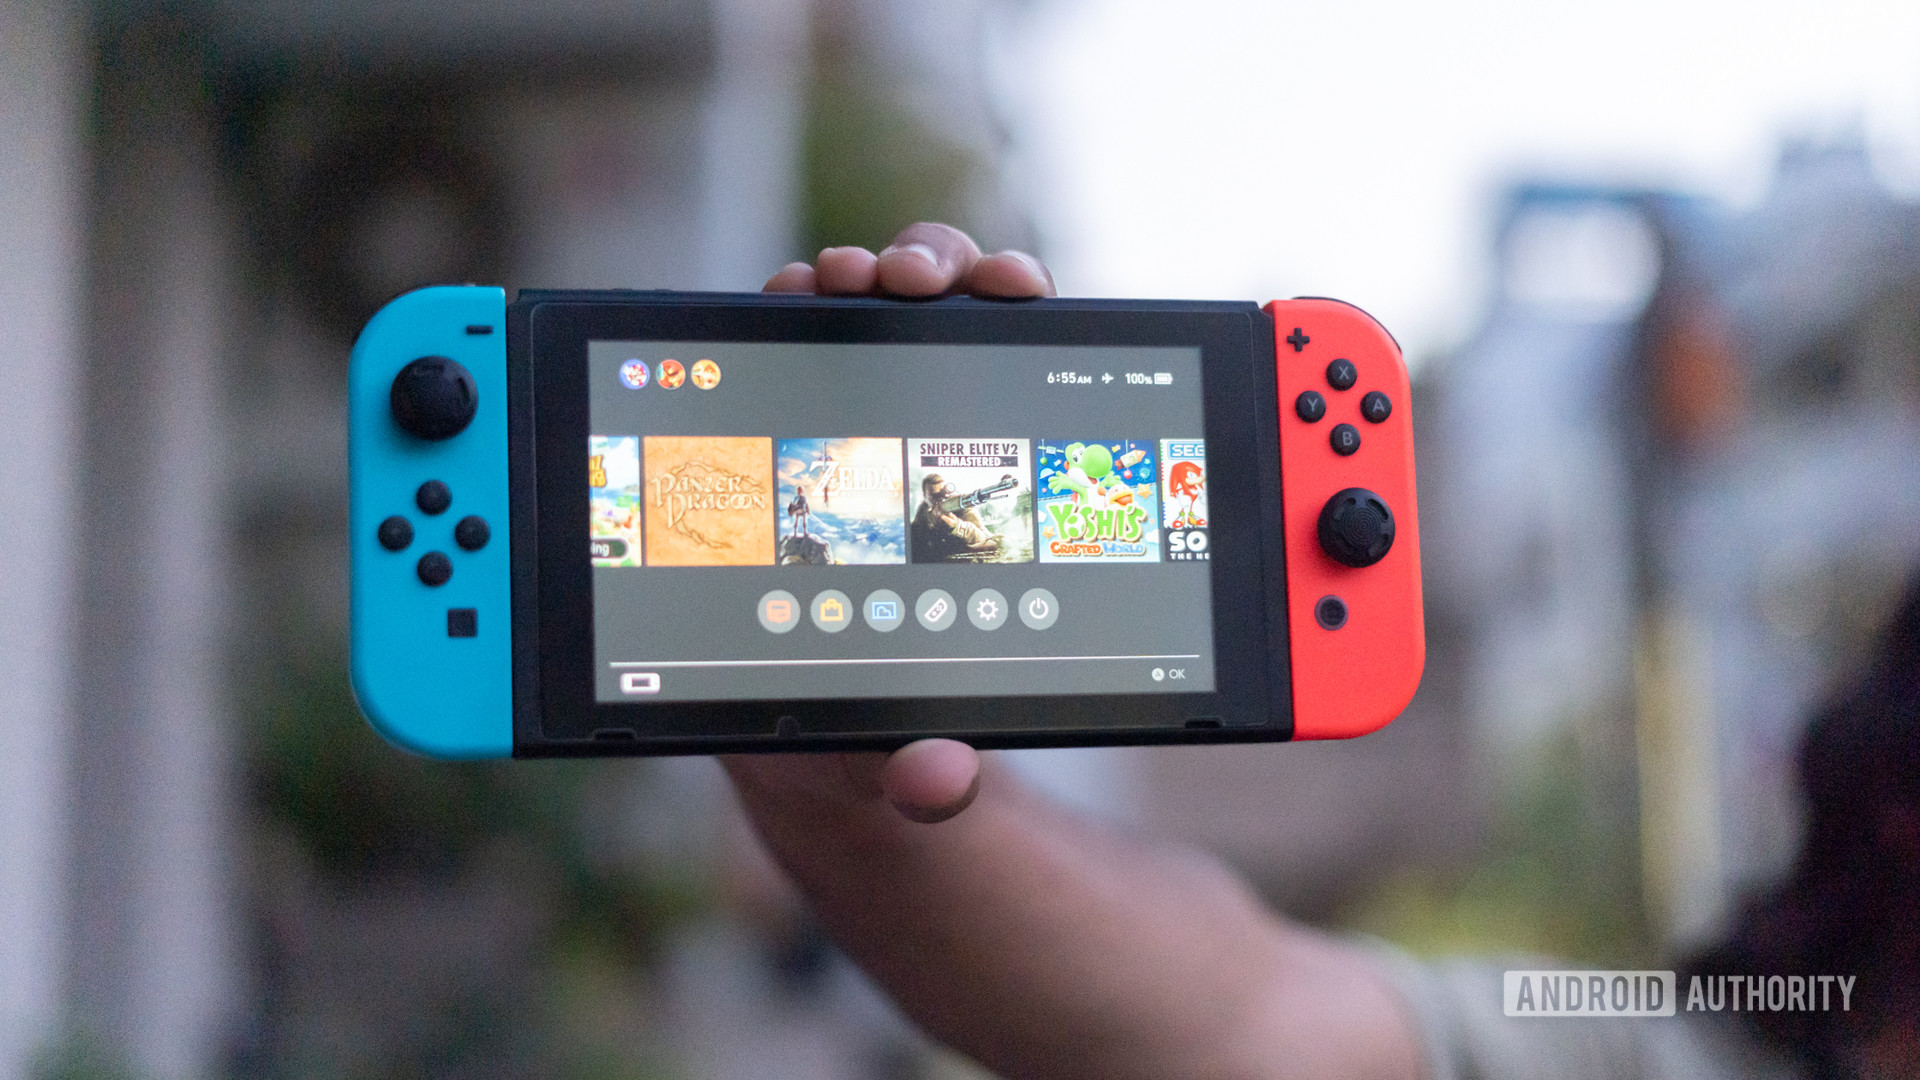 zamrzivač kora gore  Nintendo Switch buying guide: What you need to know - Android Authority